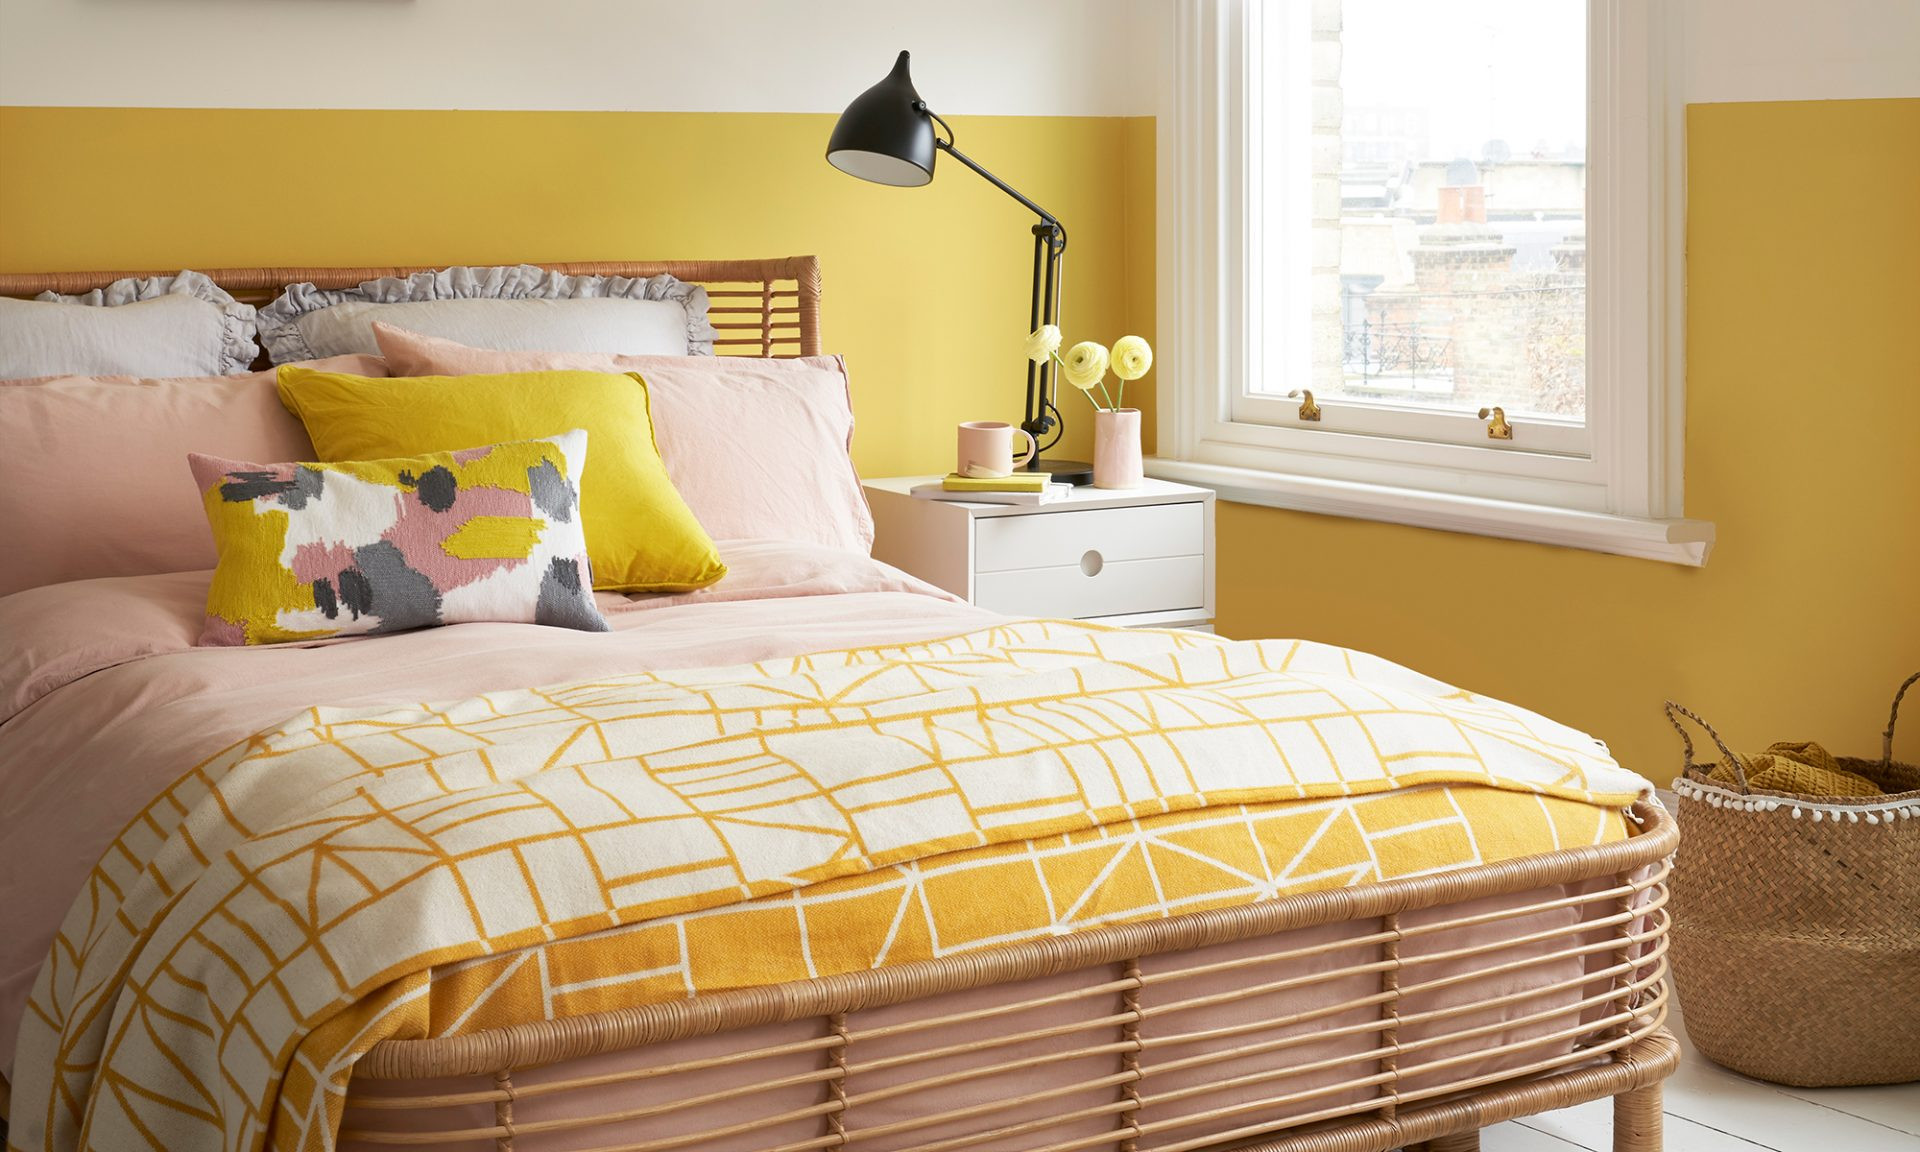 Yellow Bedroom Decorating Ideas
 Yellow bedroom ideas for sunny mornings and sweet dreams